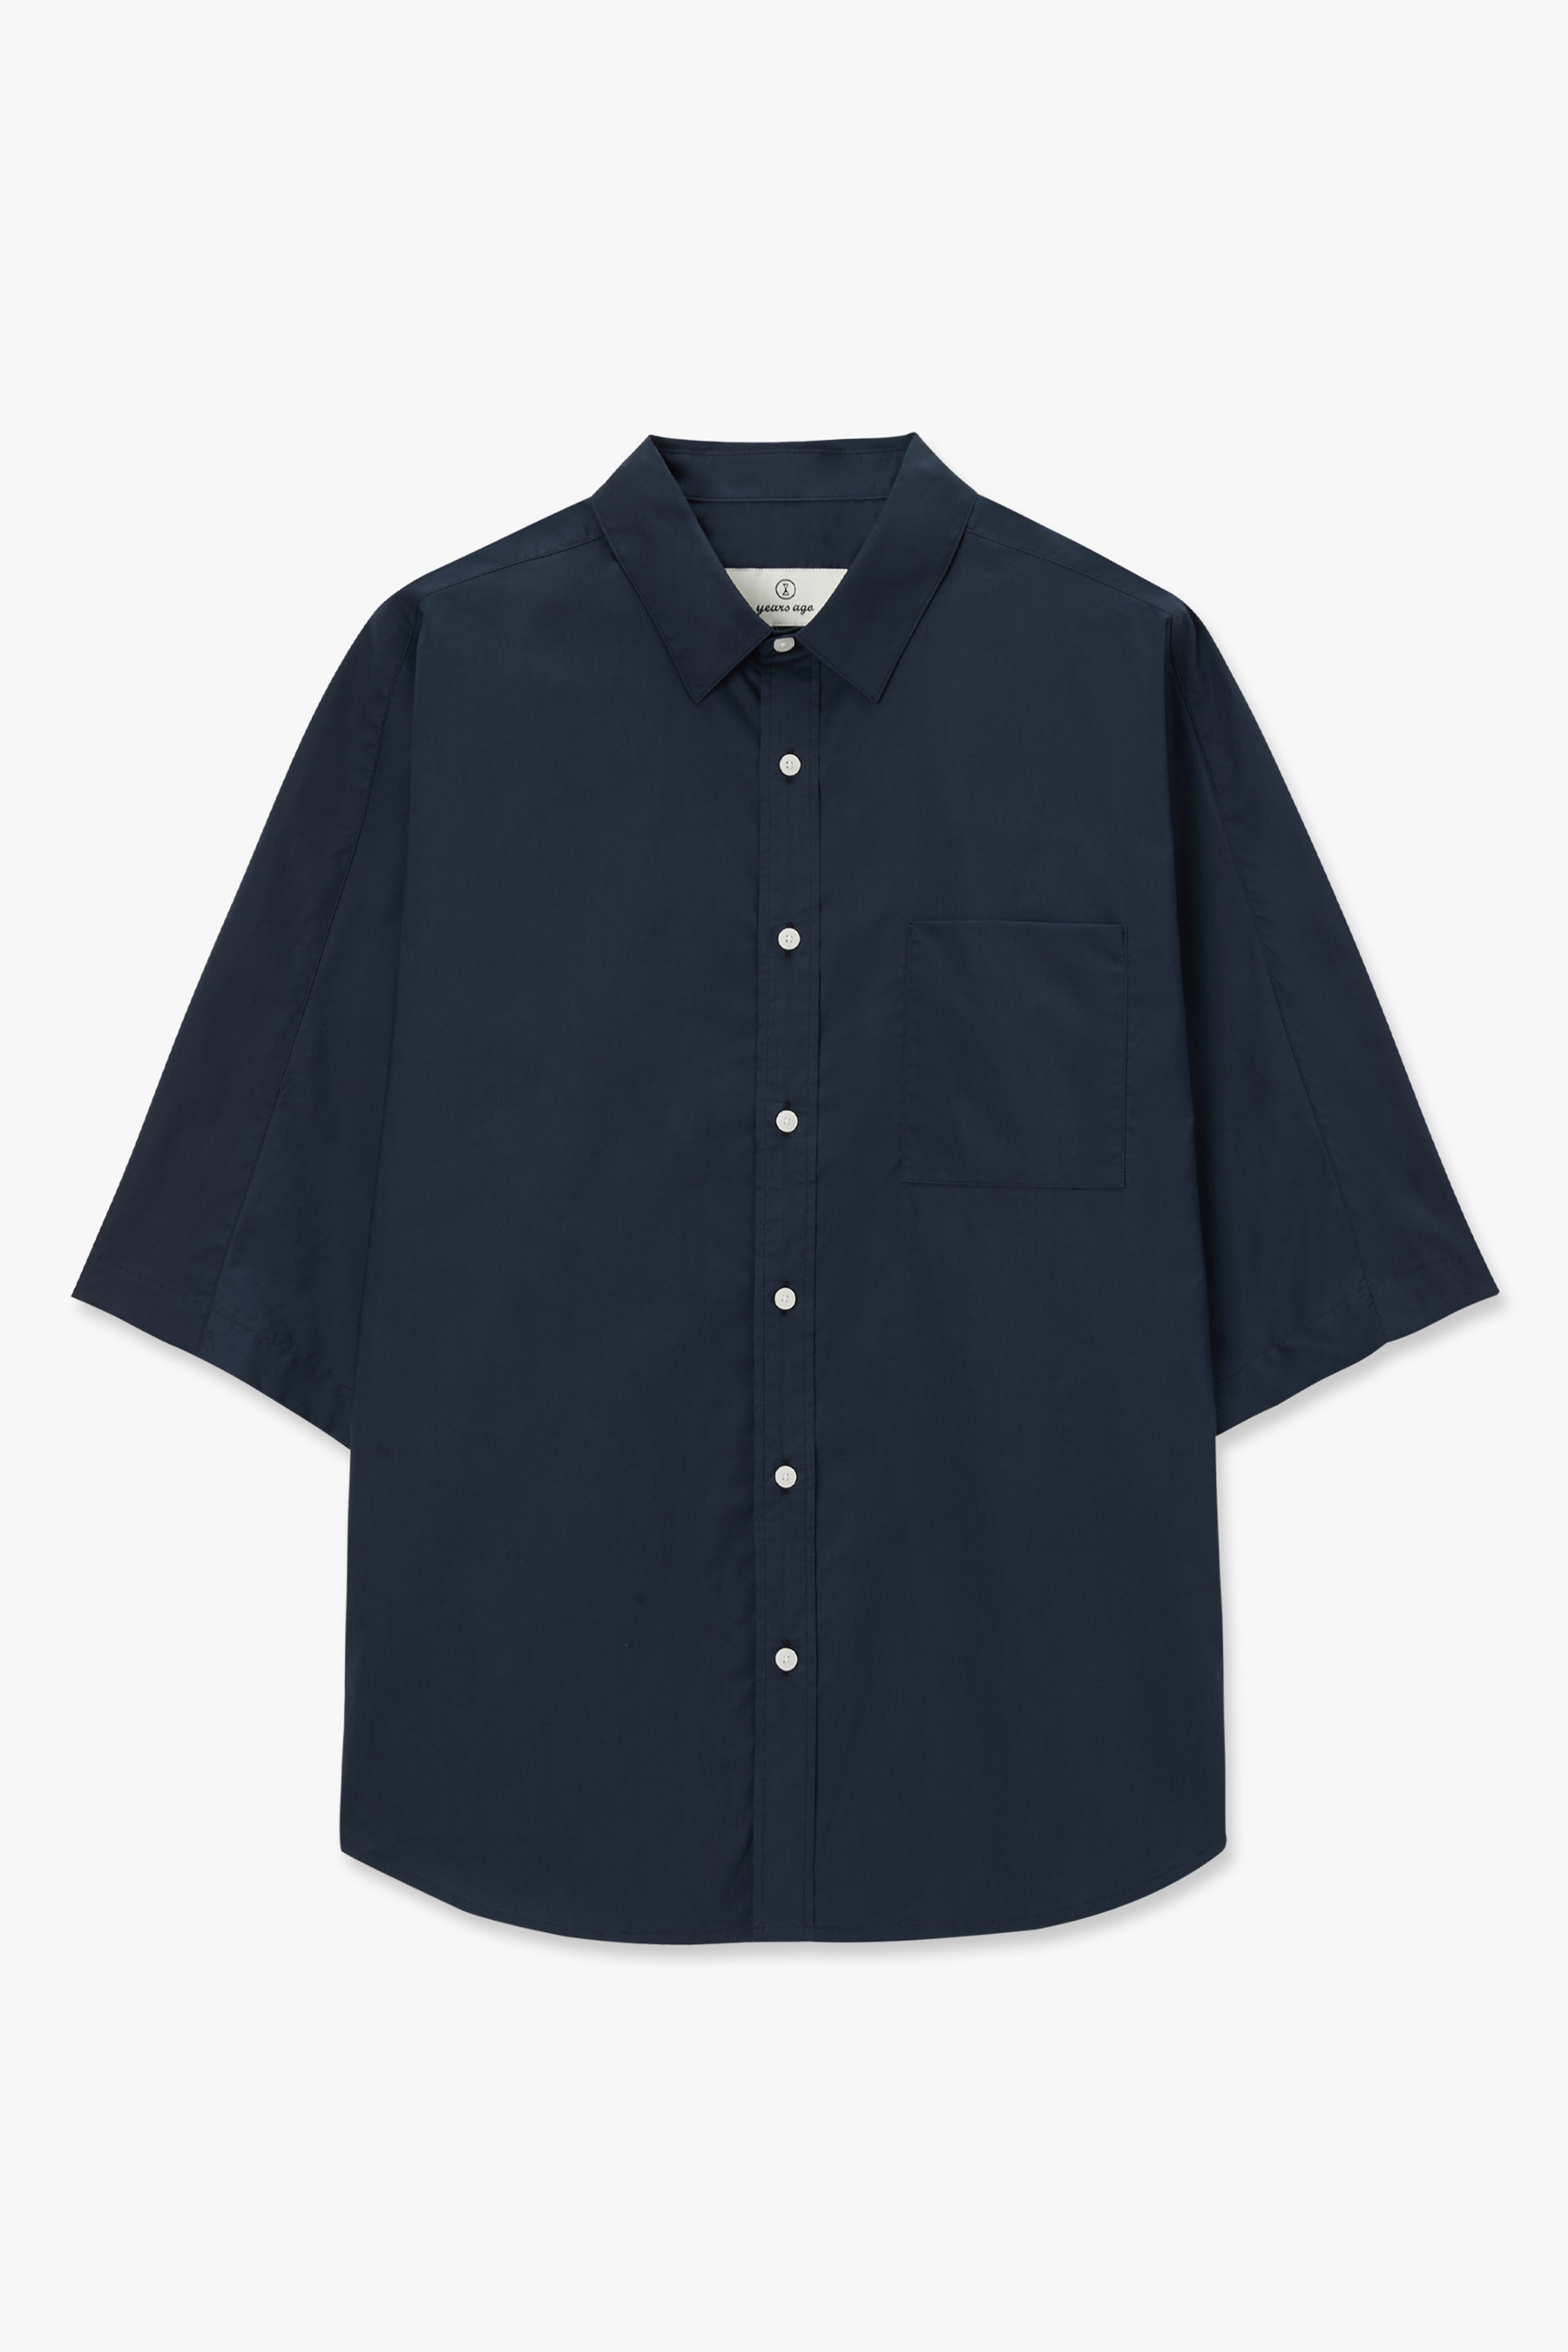 DEEP NAVY COVERABLE SHIRTS 03